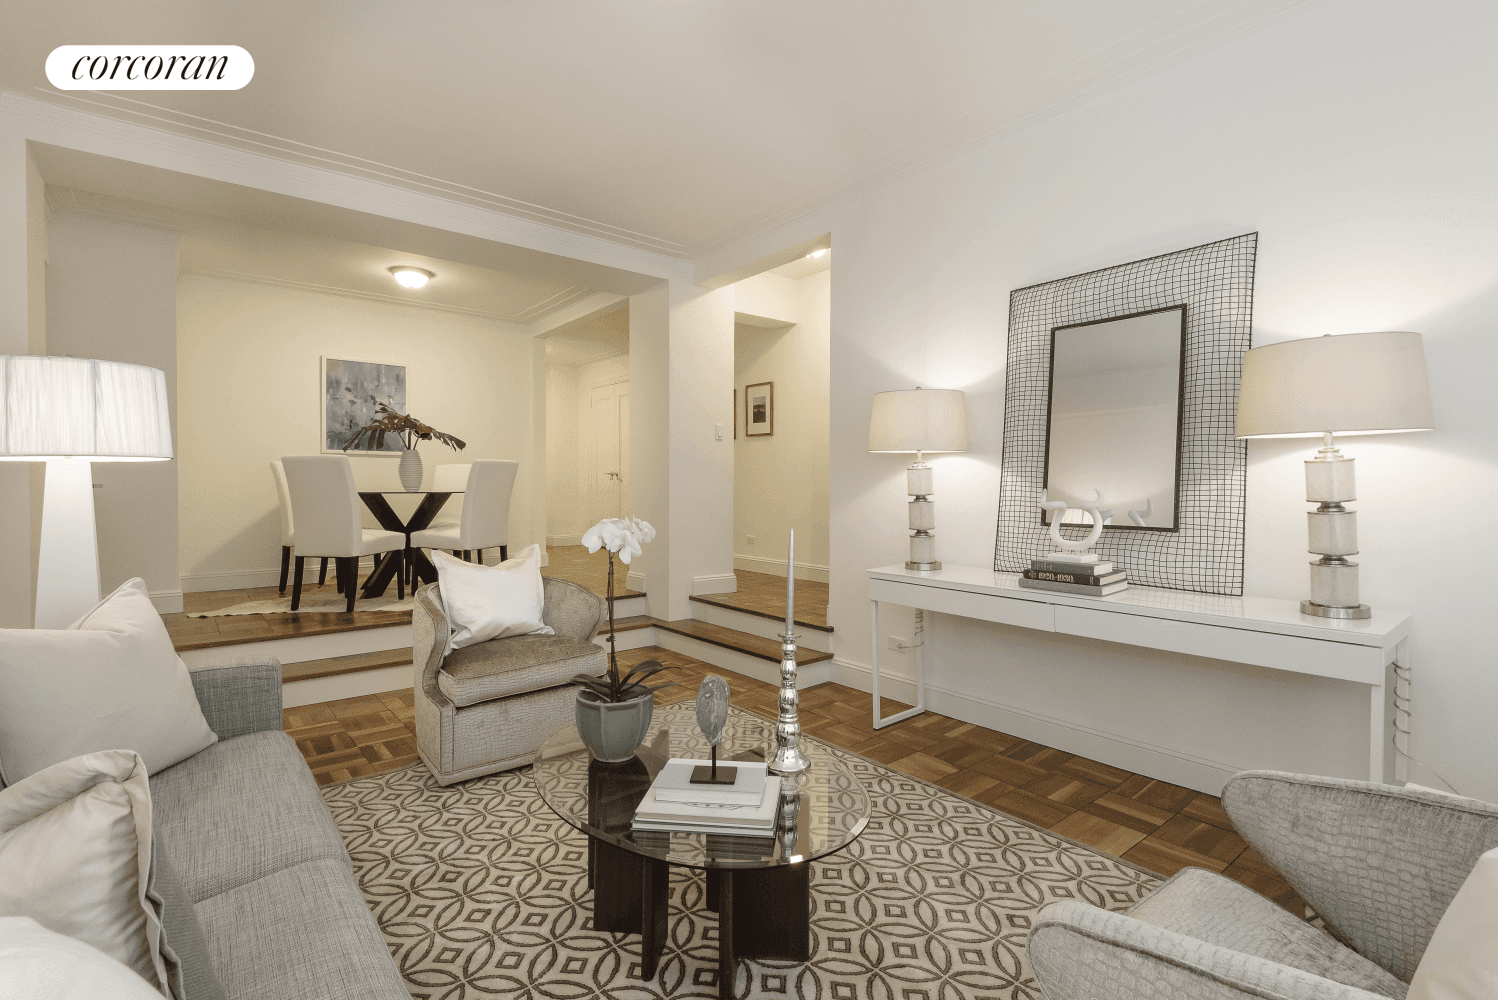 Located at The Century Condominium on Central Park West between 62nd and 63rd streets, this spacious unique prewar corner one bedroom has been completely renovated with new kitchen, bath, through ...